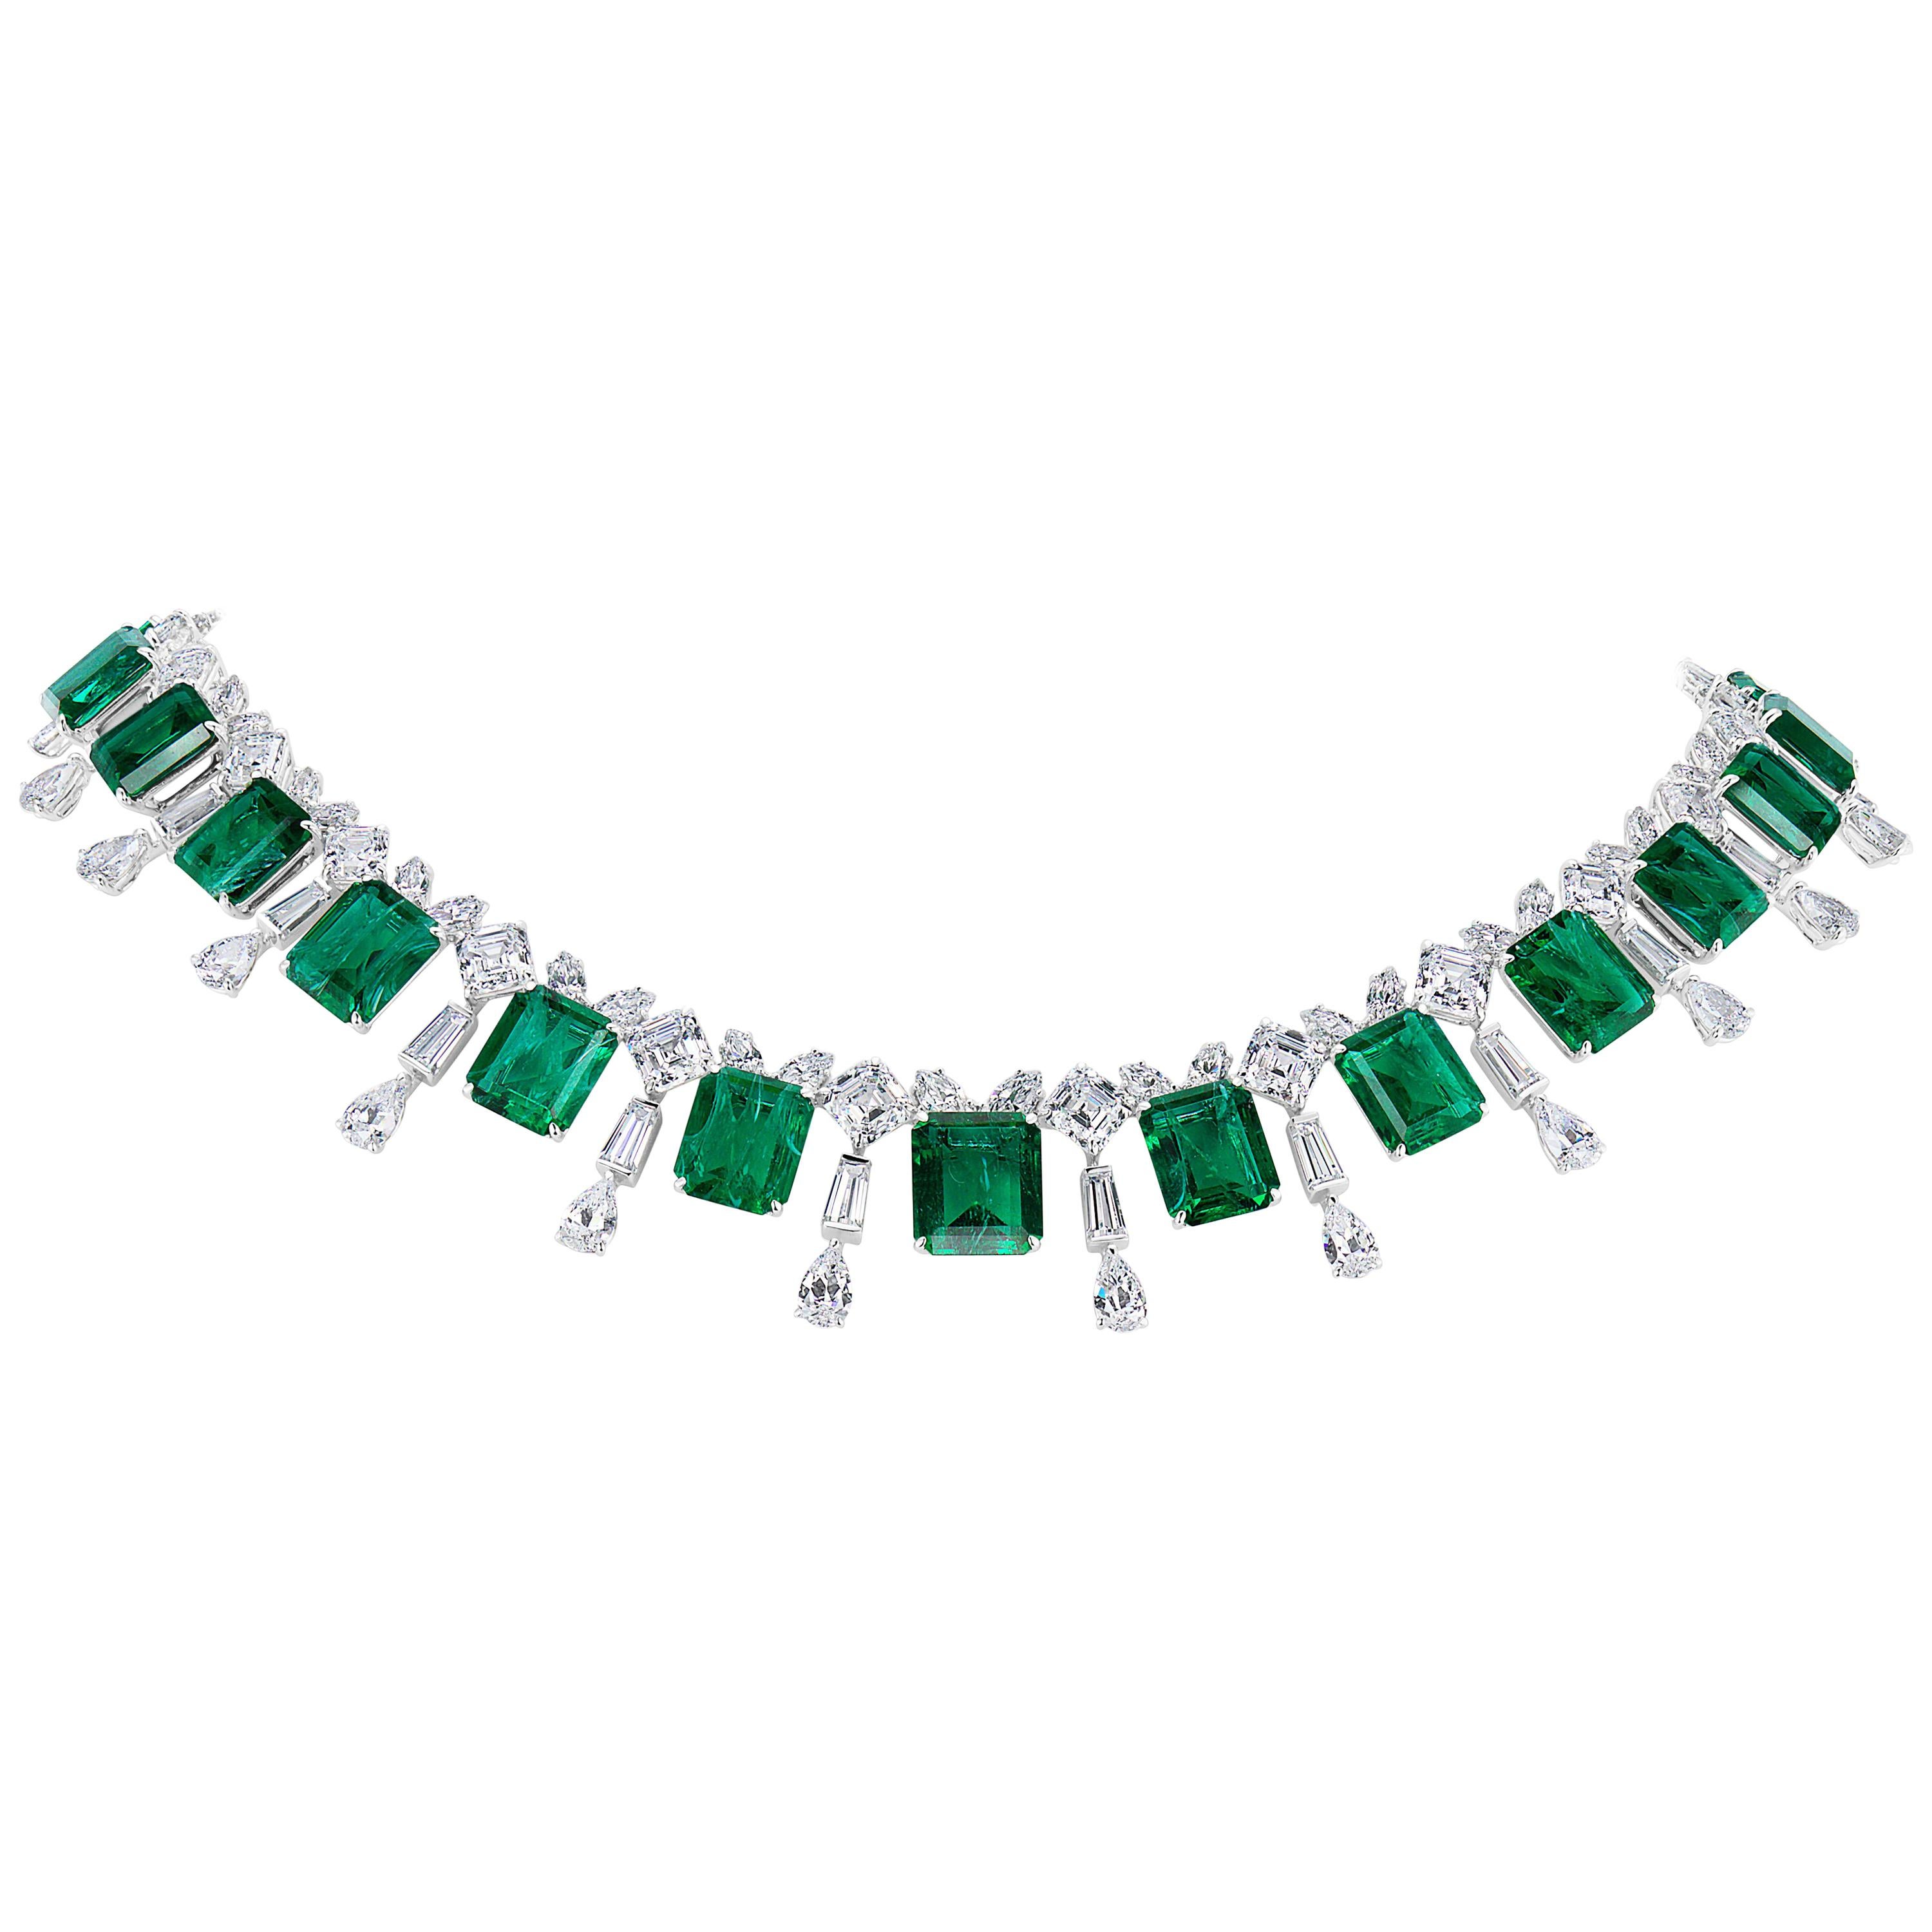 Magnificent Costume Jewelry Emerald Diamond La Grande Soiree Necklace Made with 19 Man-Made Square Graduated 'Flawed' Emeralds; Marquise, Square Cut, Taper Baguette and Pear Shaped  Cubic Zirconias hand-set in Rhodium Sterling Silver measures 16 1/2